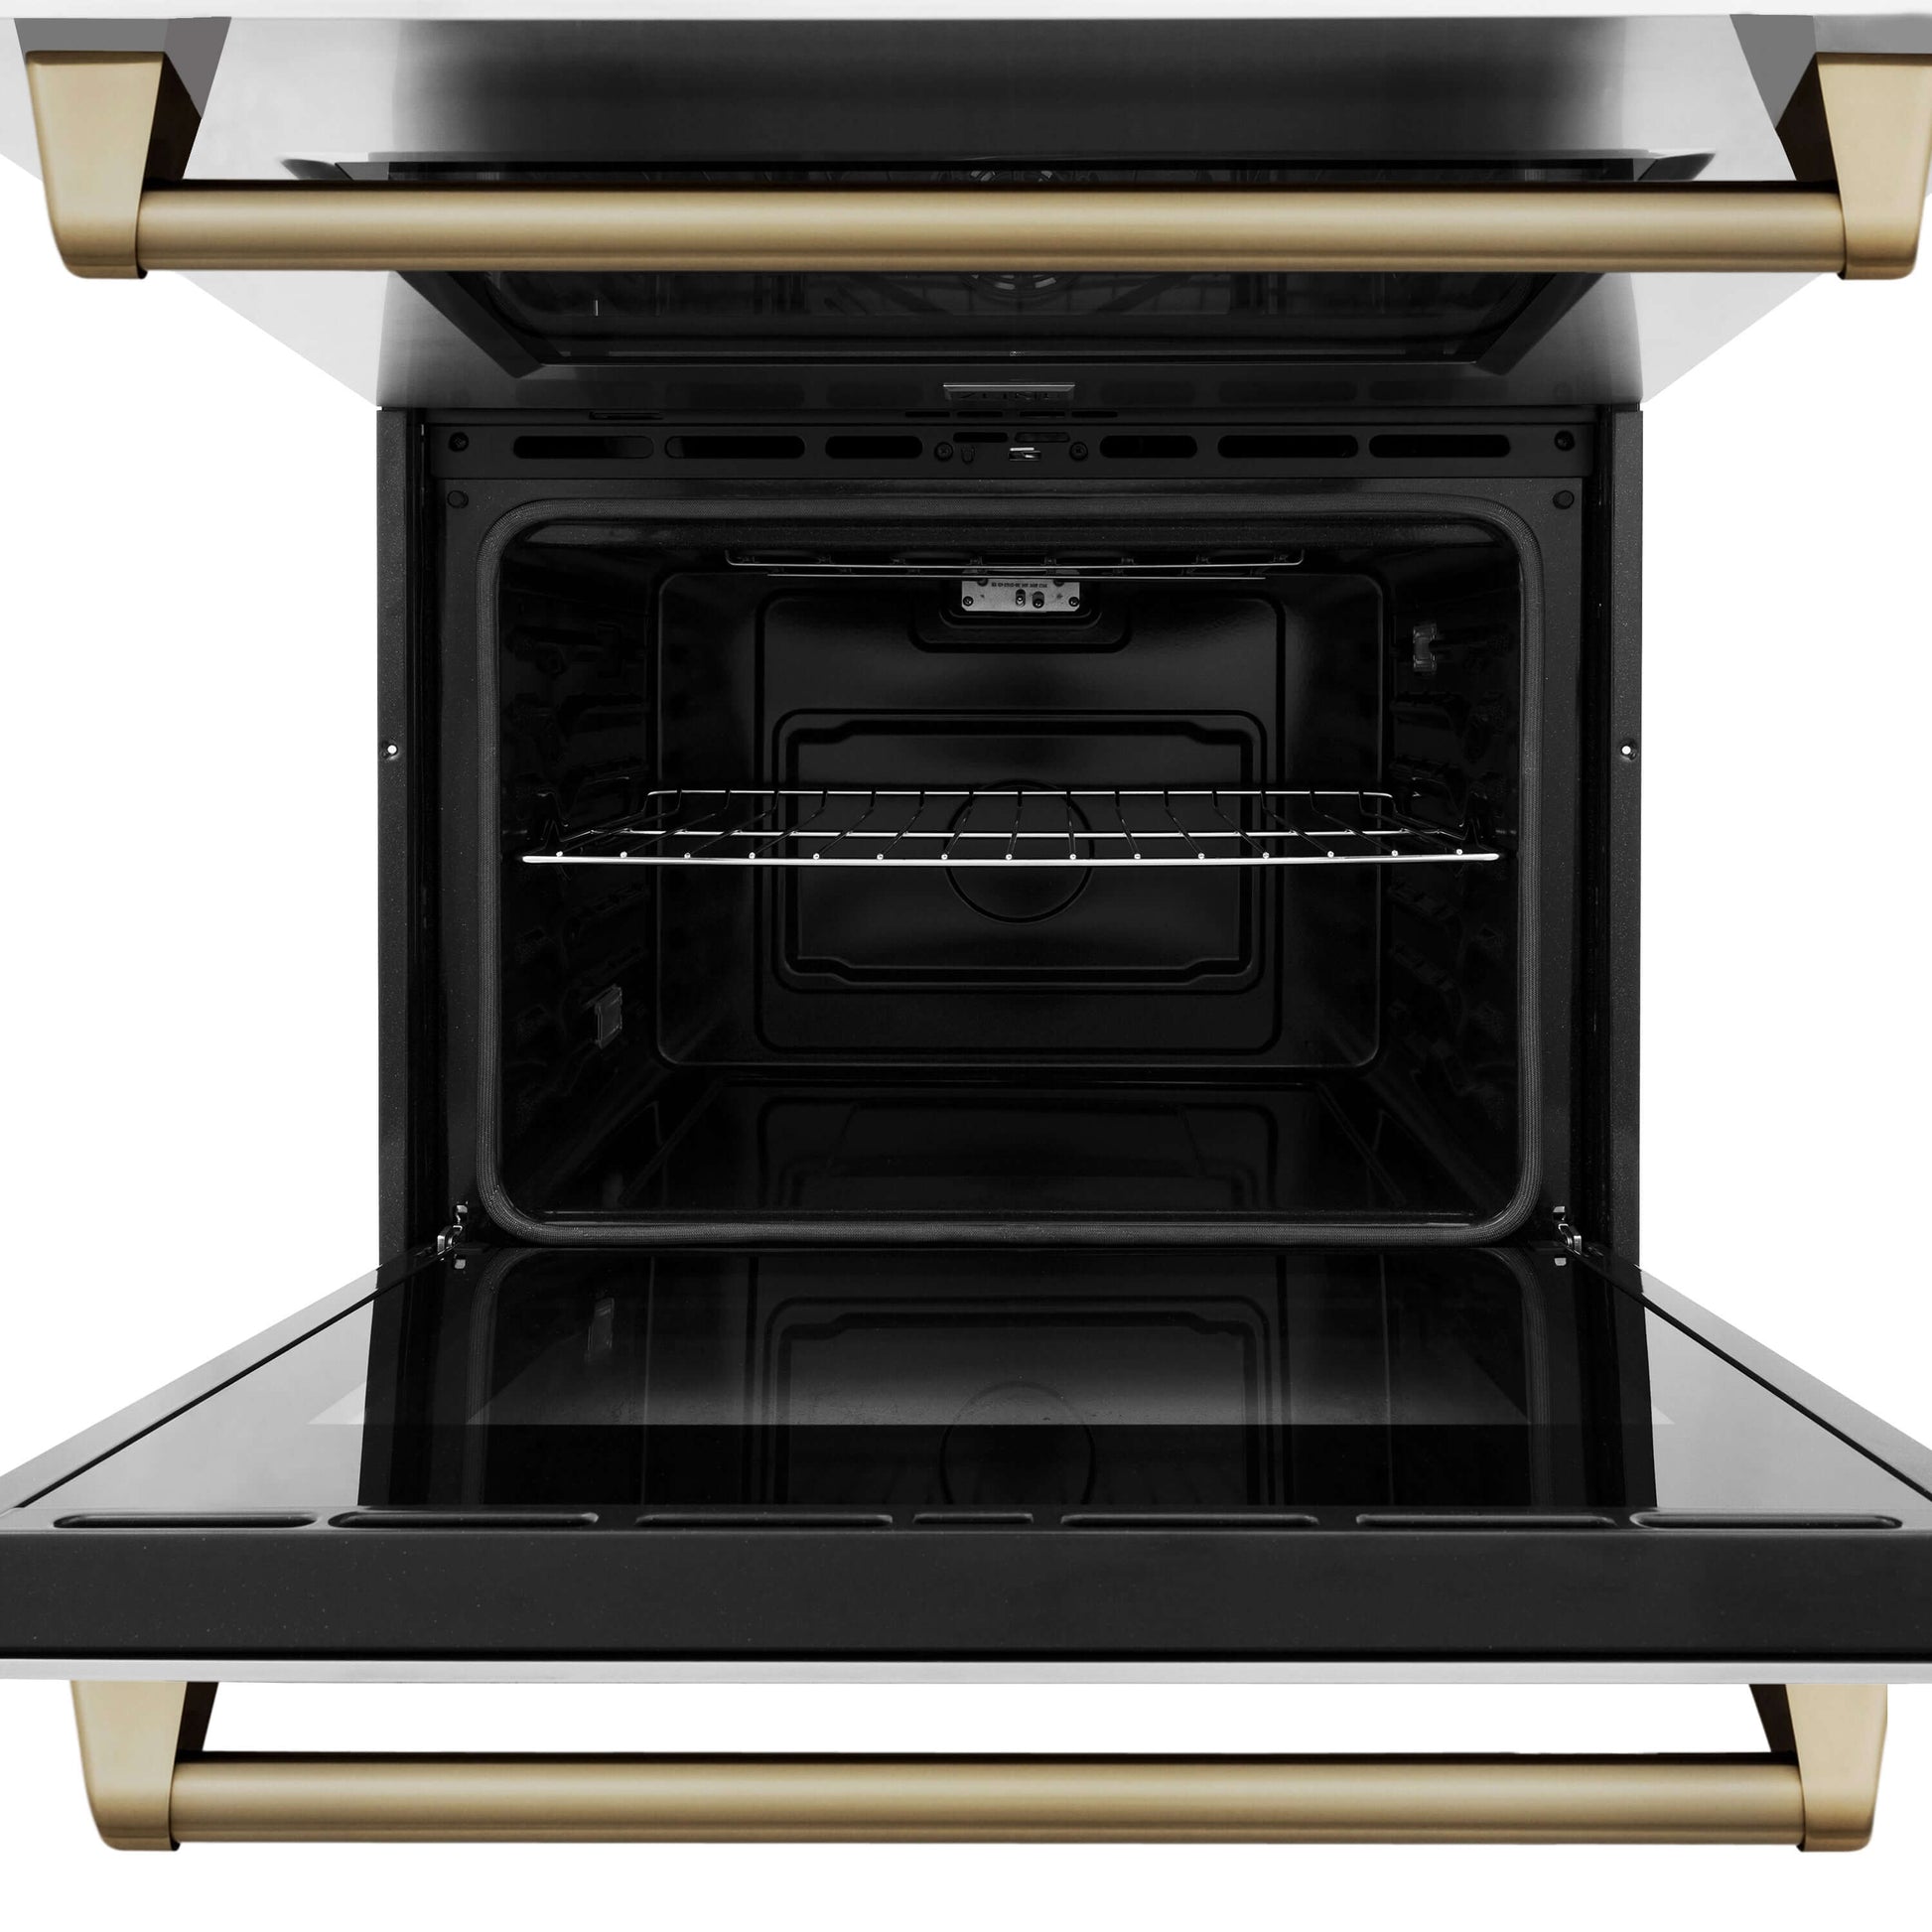 ZLINE Autograph Edition 30" Electric Double Wall Oven - Stainless Steel with Accents, Self Clean, True Convection